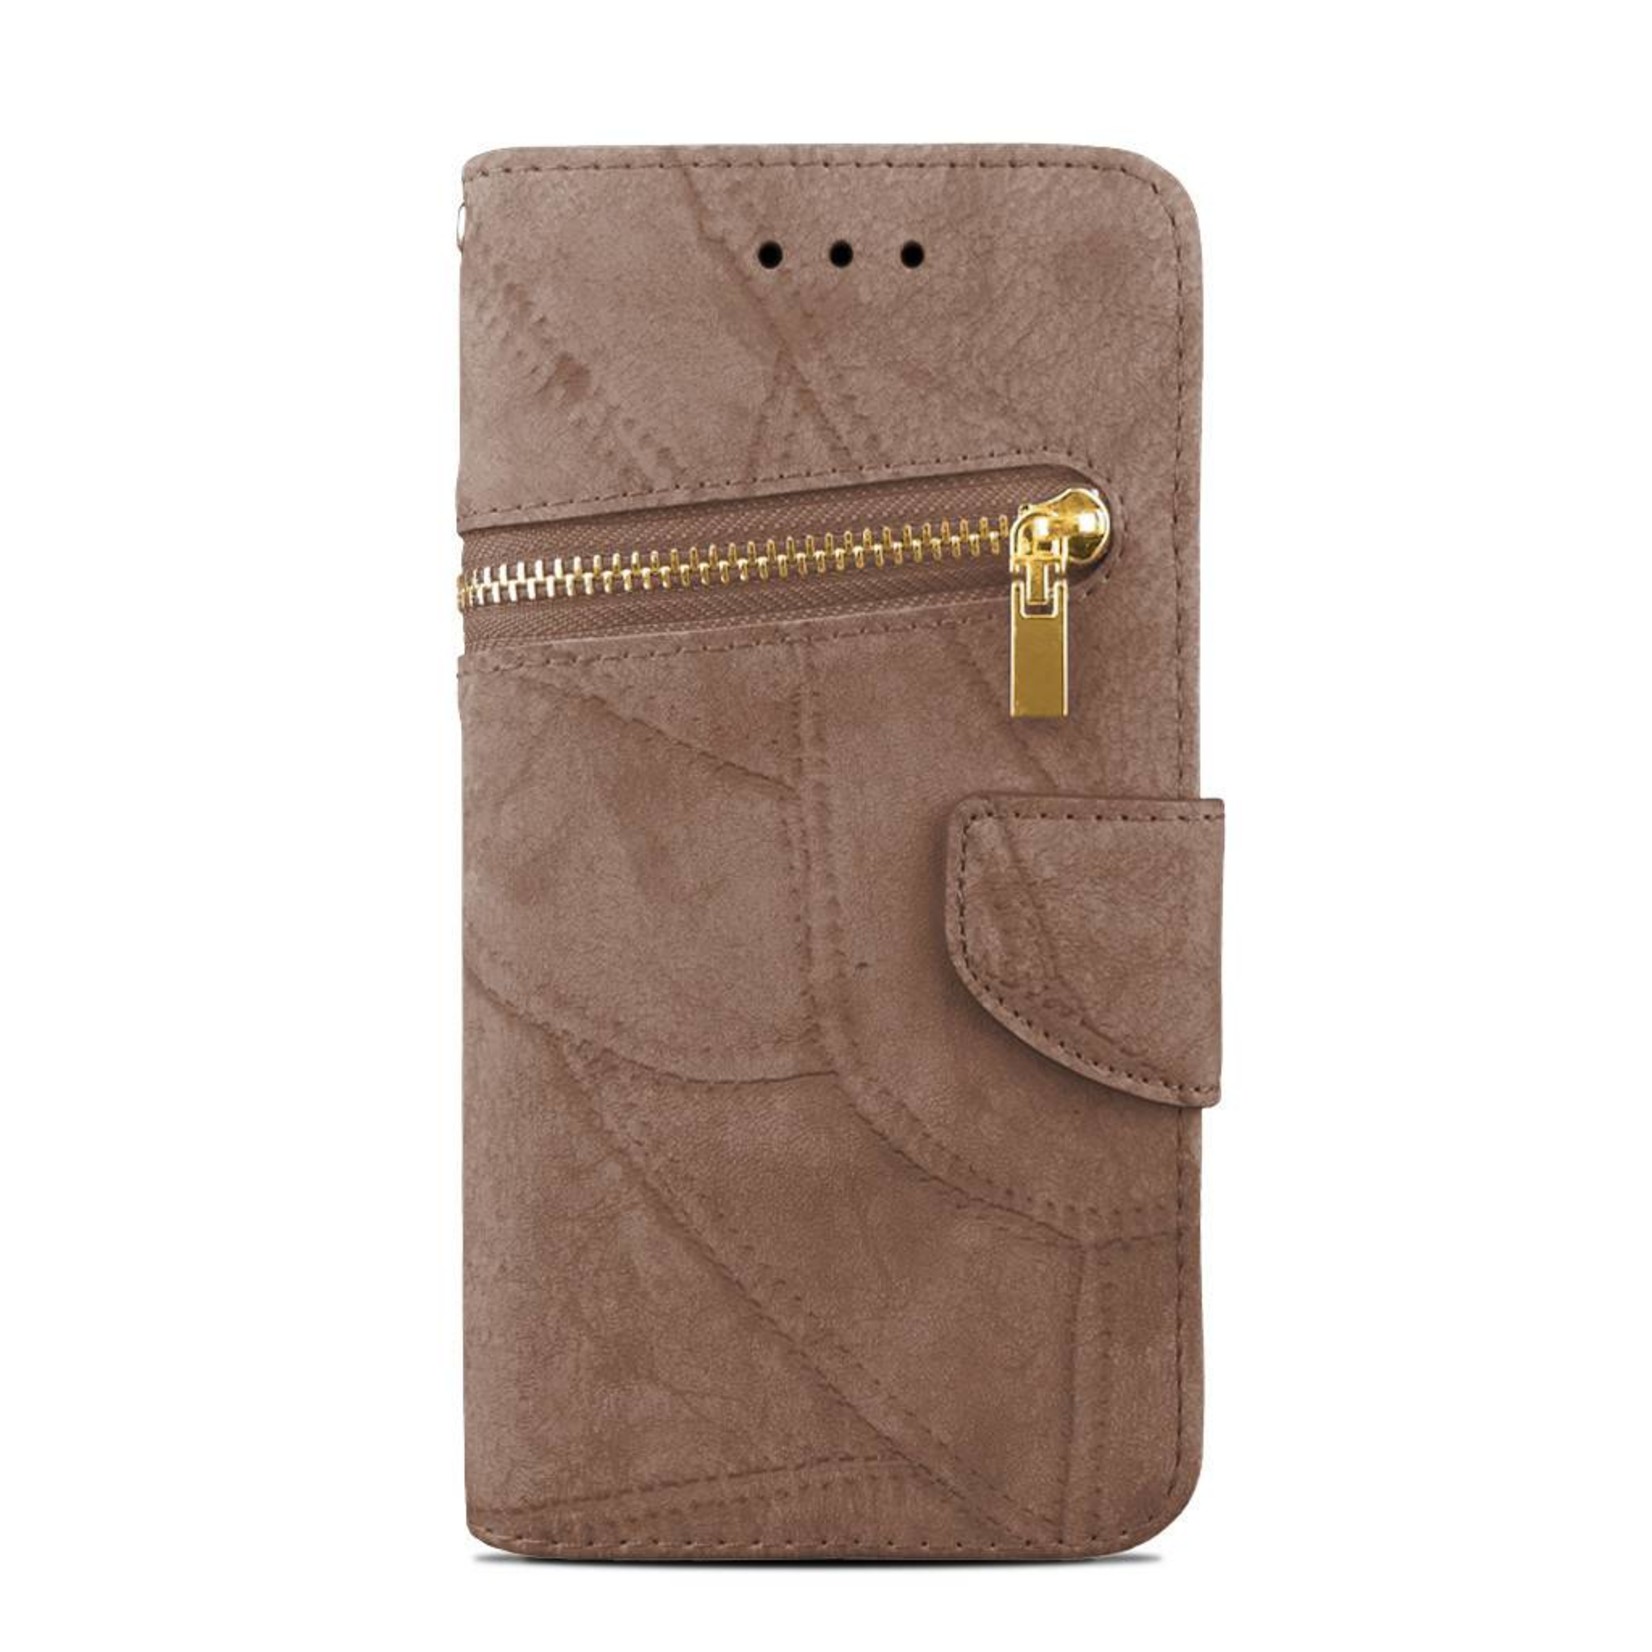 Zipper Wallet Protective Case For iPhone 7/8